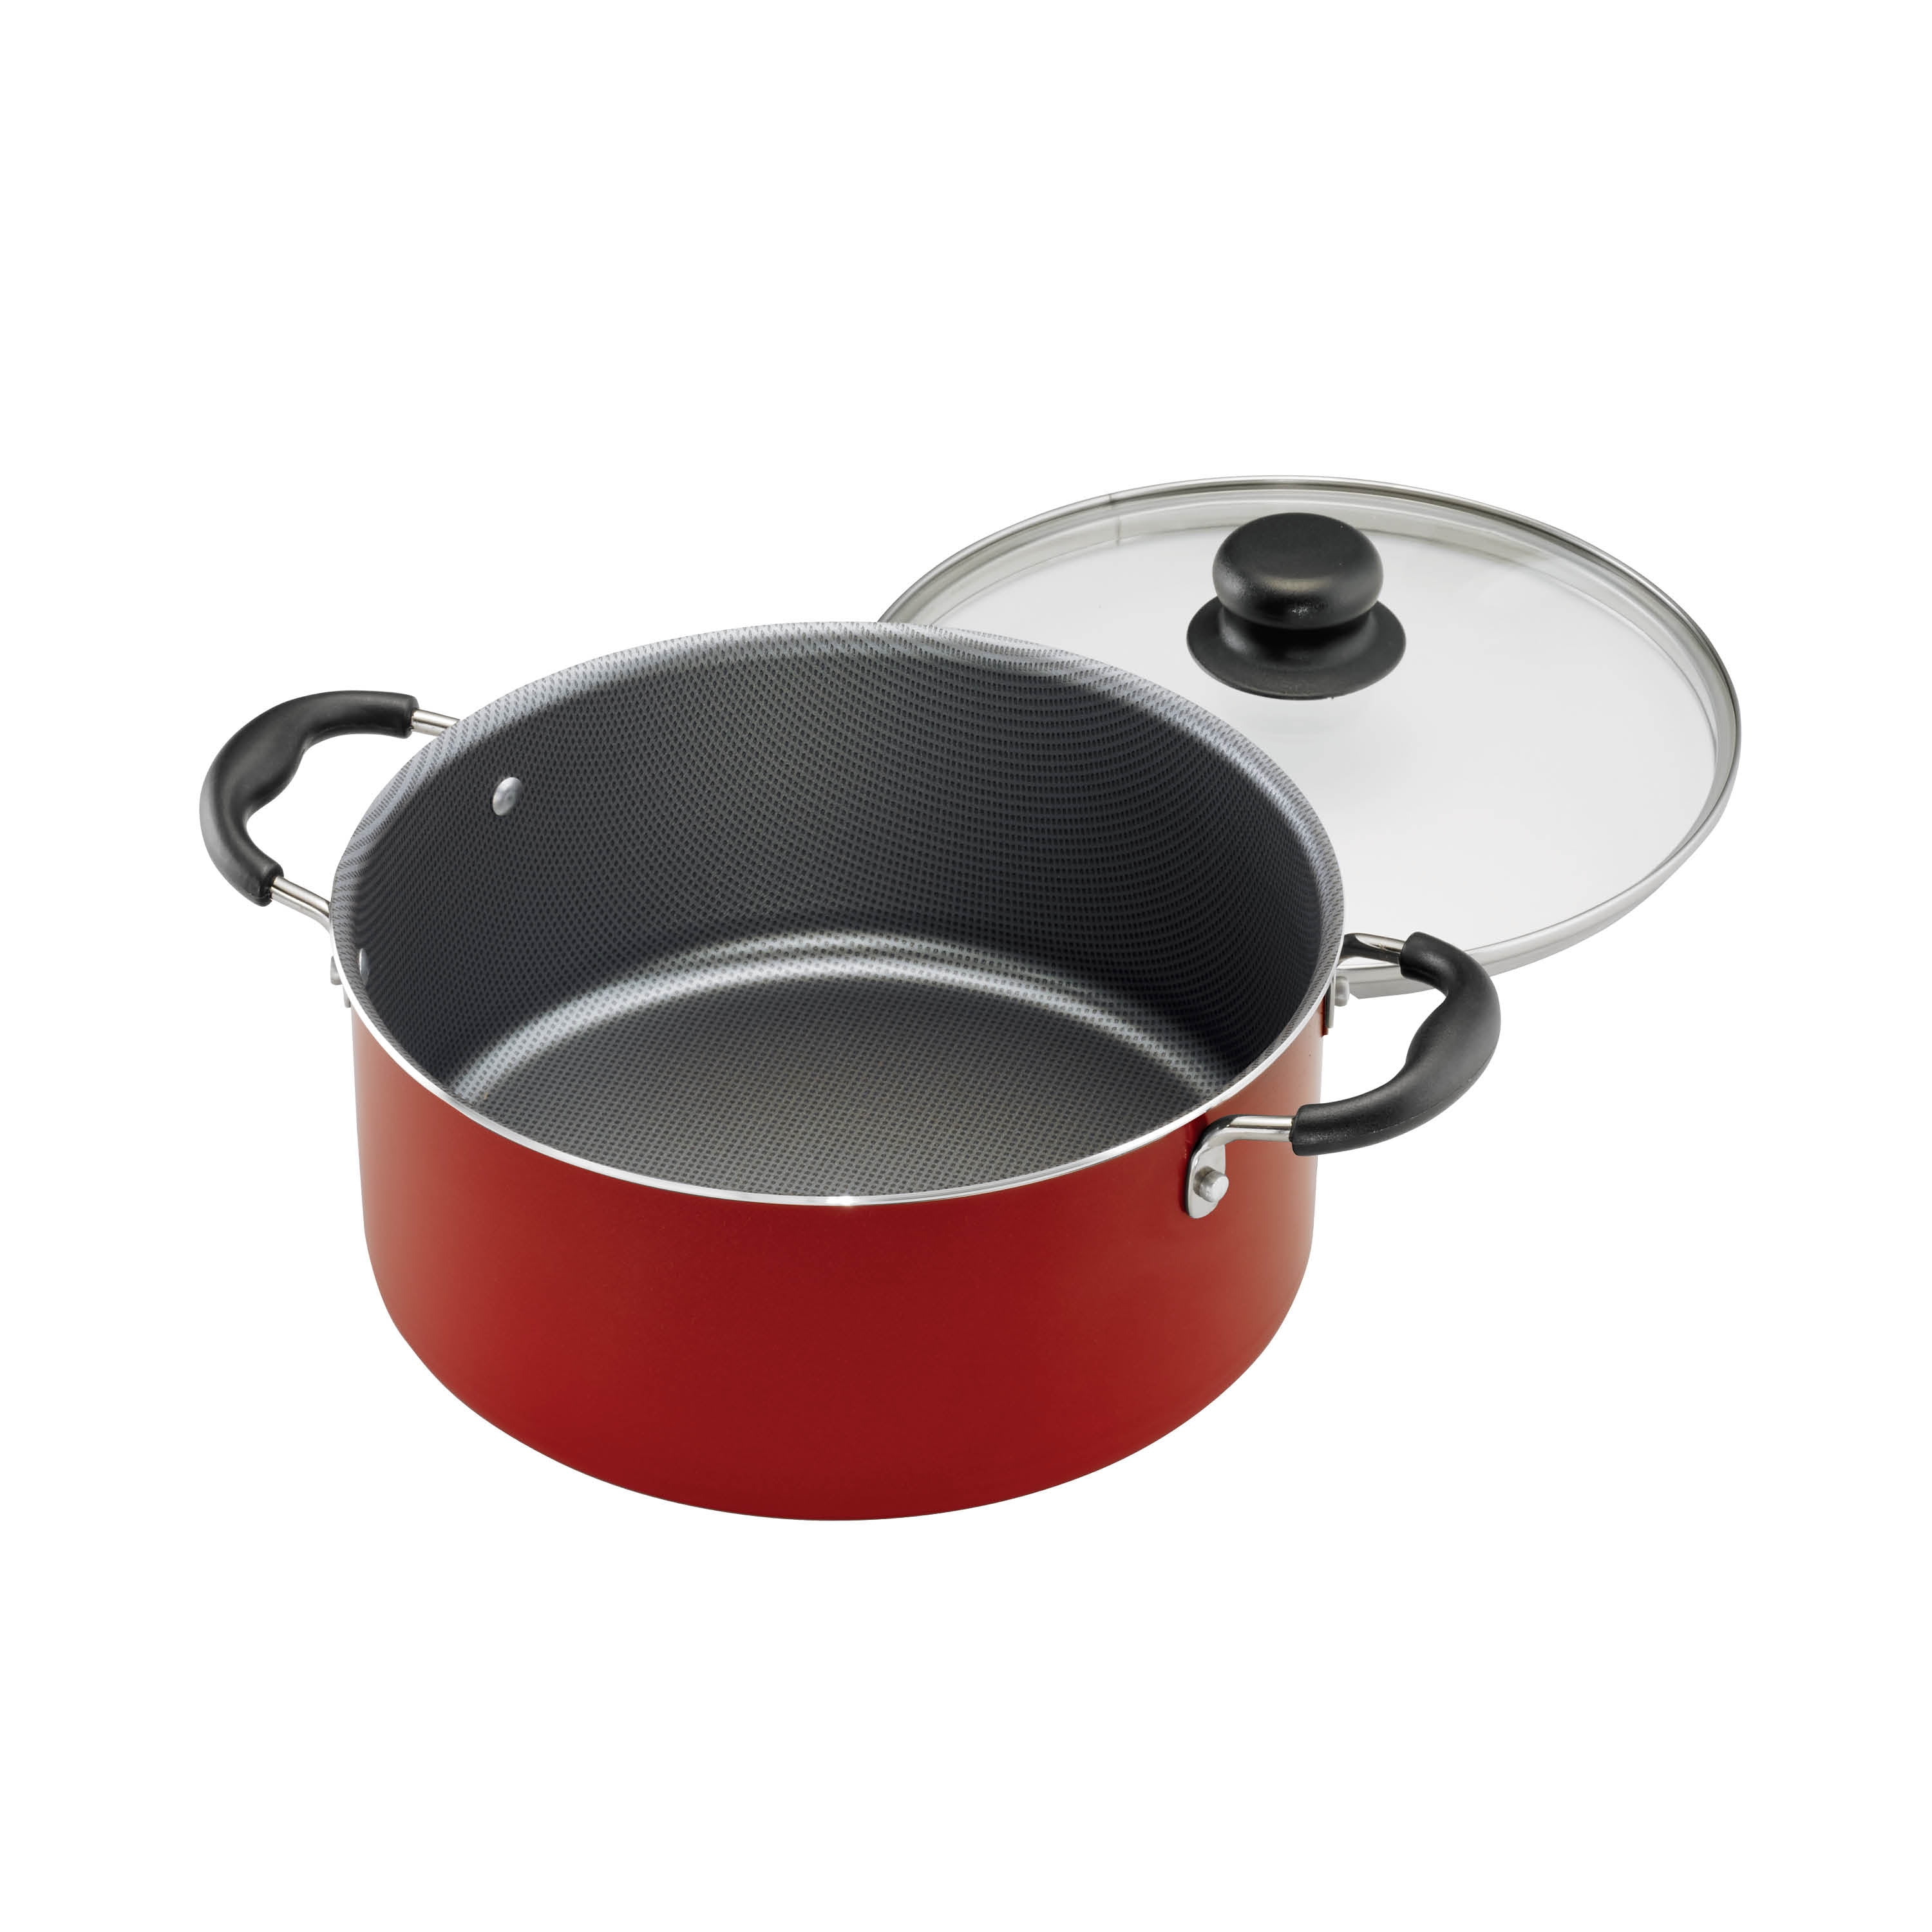 Tramontina Primaware 18 Piece Non-stick Cookware Set, Red – A Belle Decor